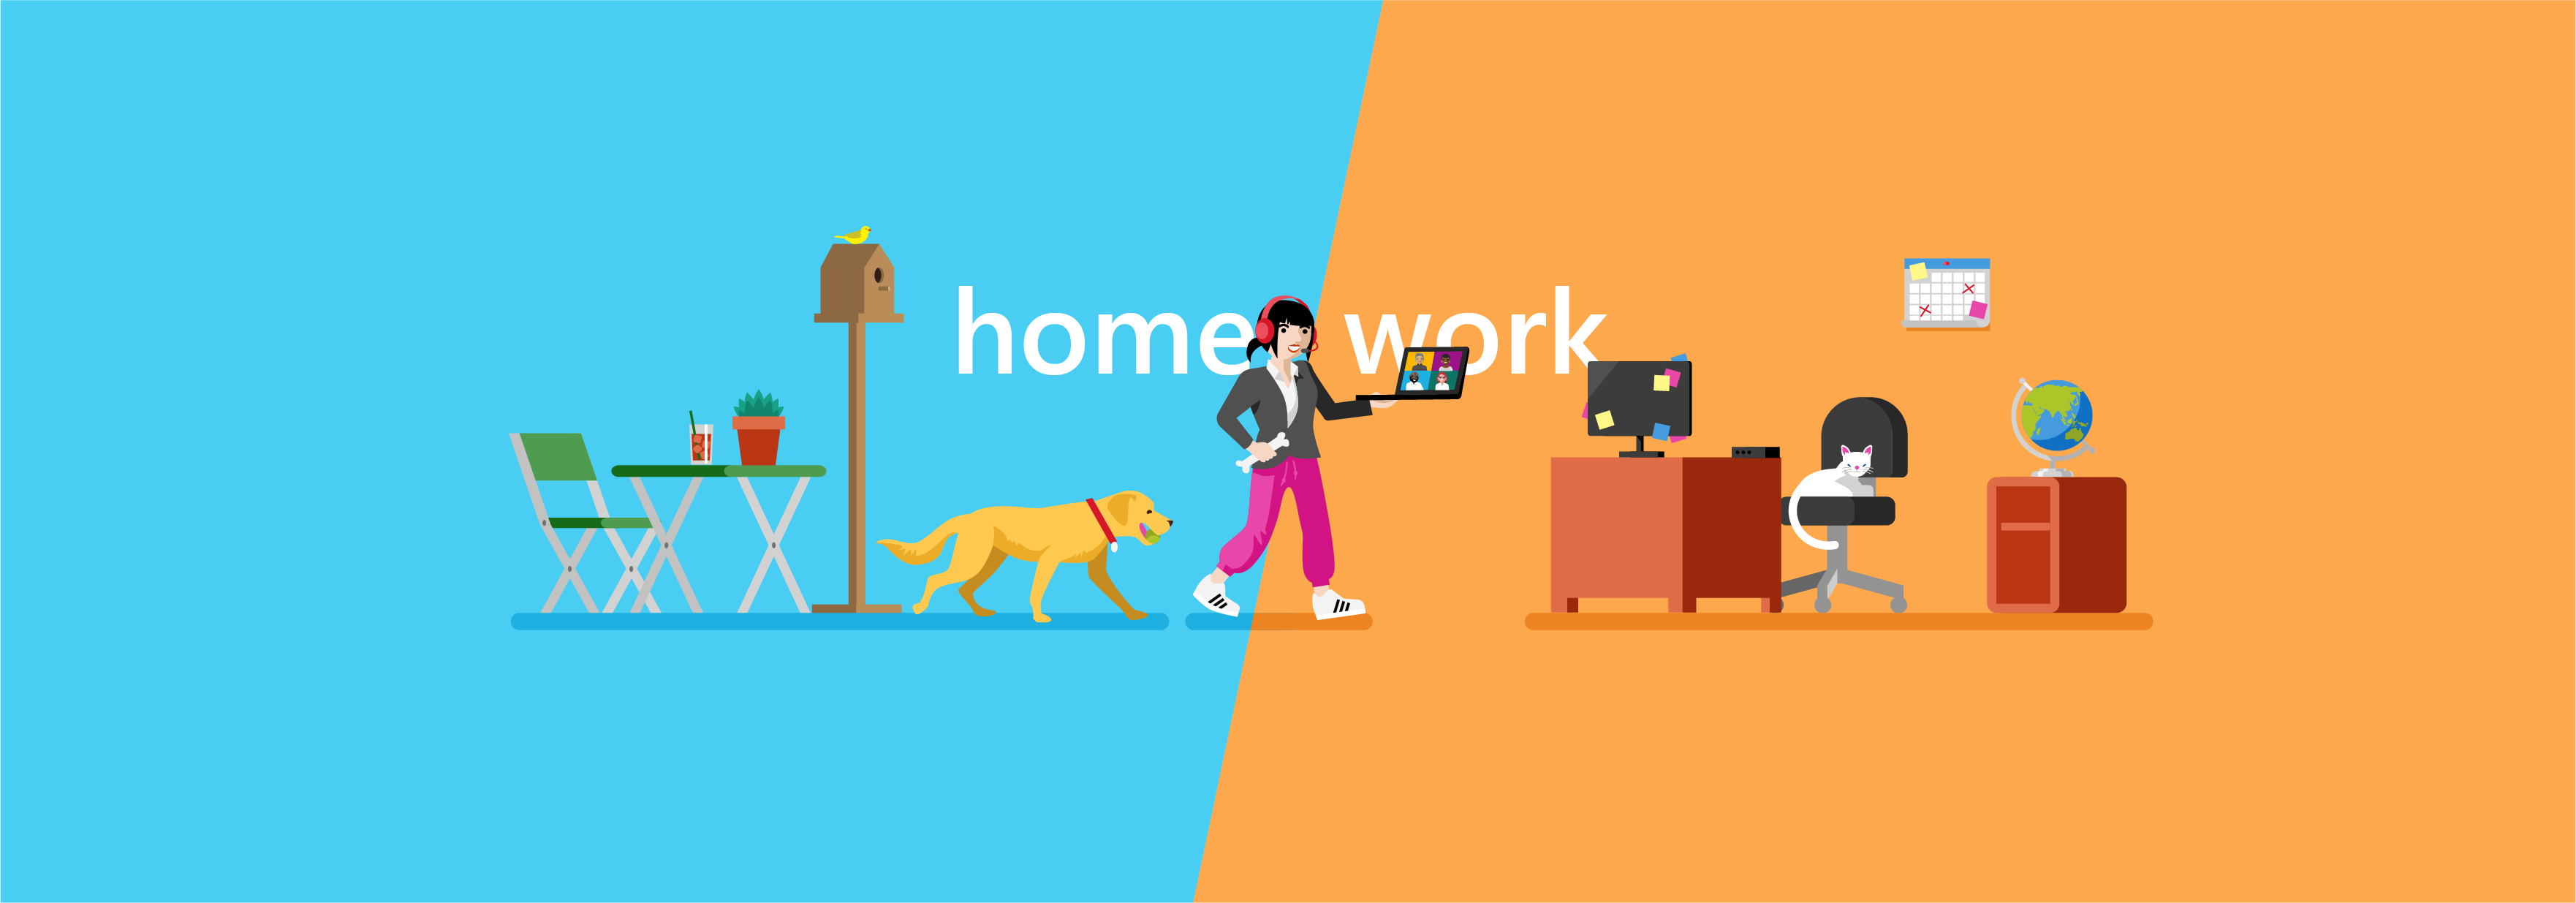 Illustration of a woman managing remote work with a dog, home office, and joining a Teams meeting